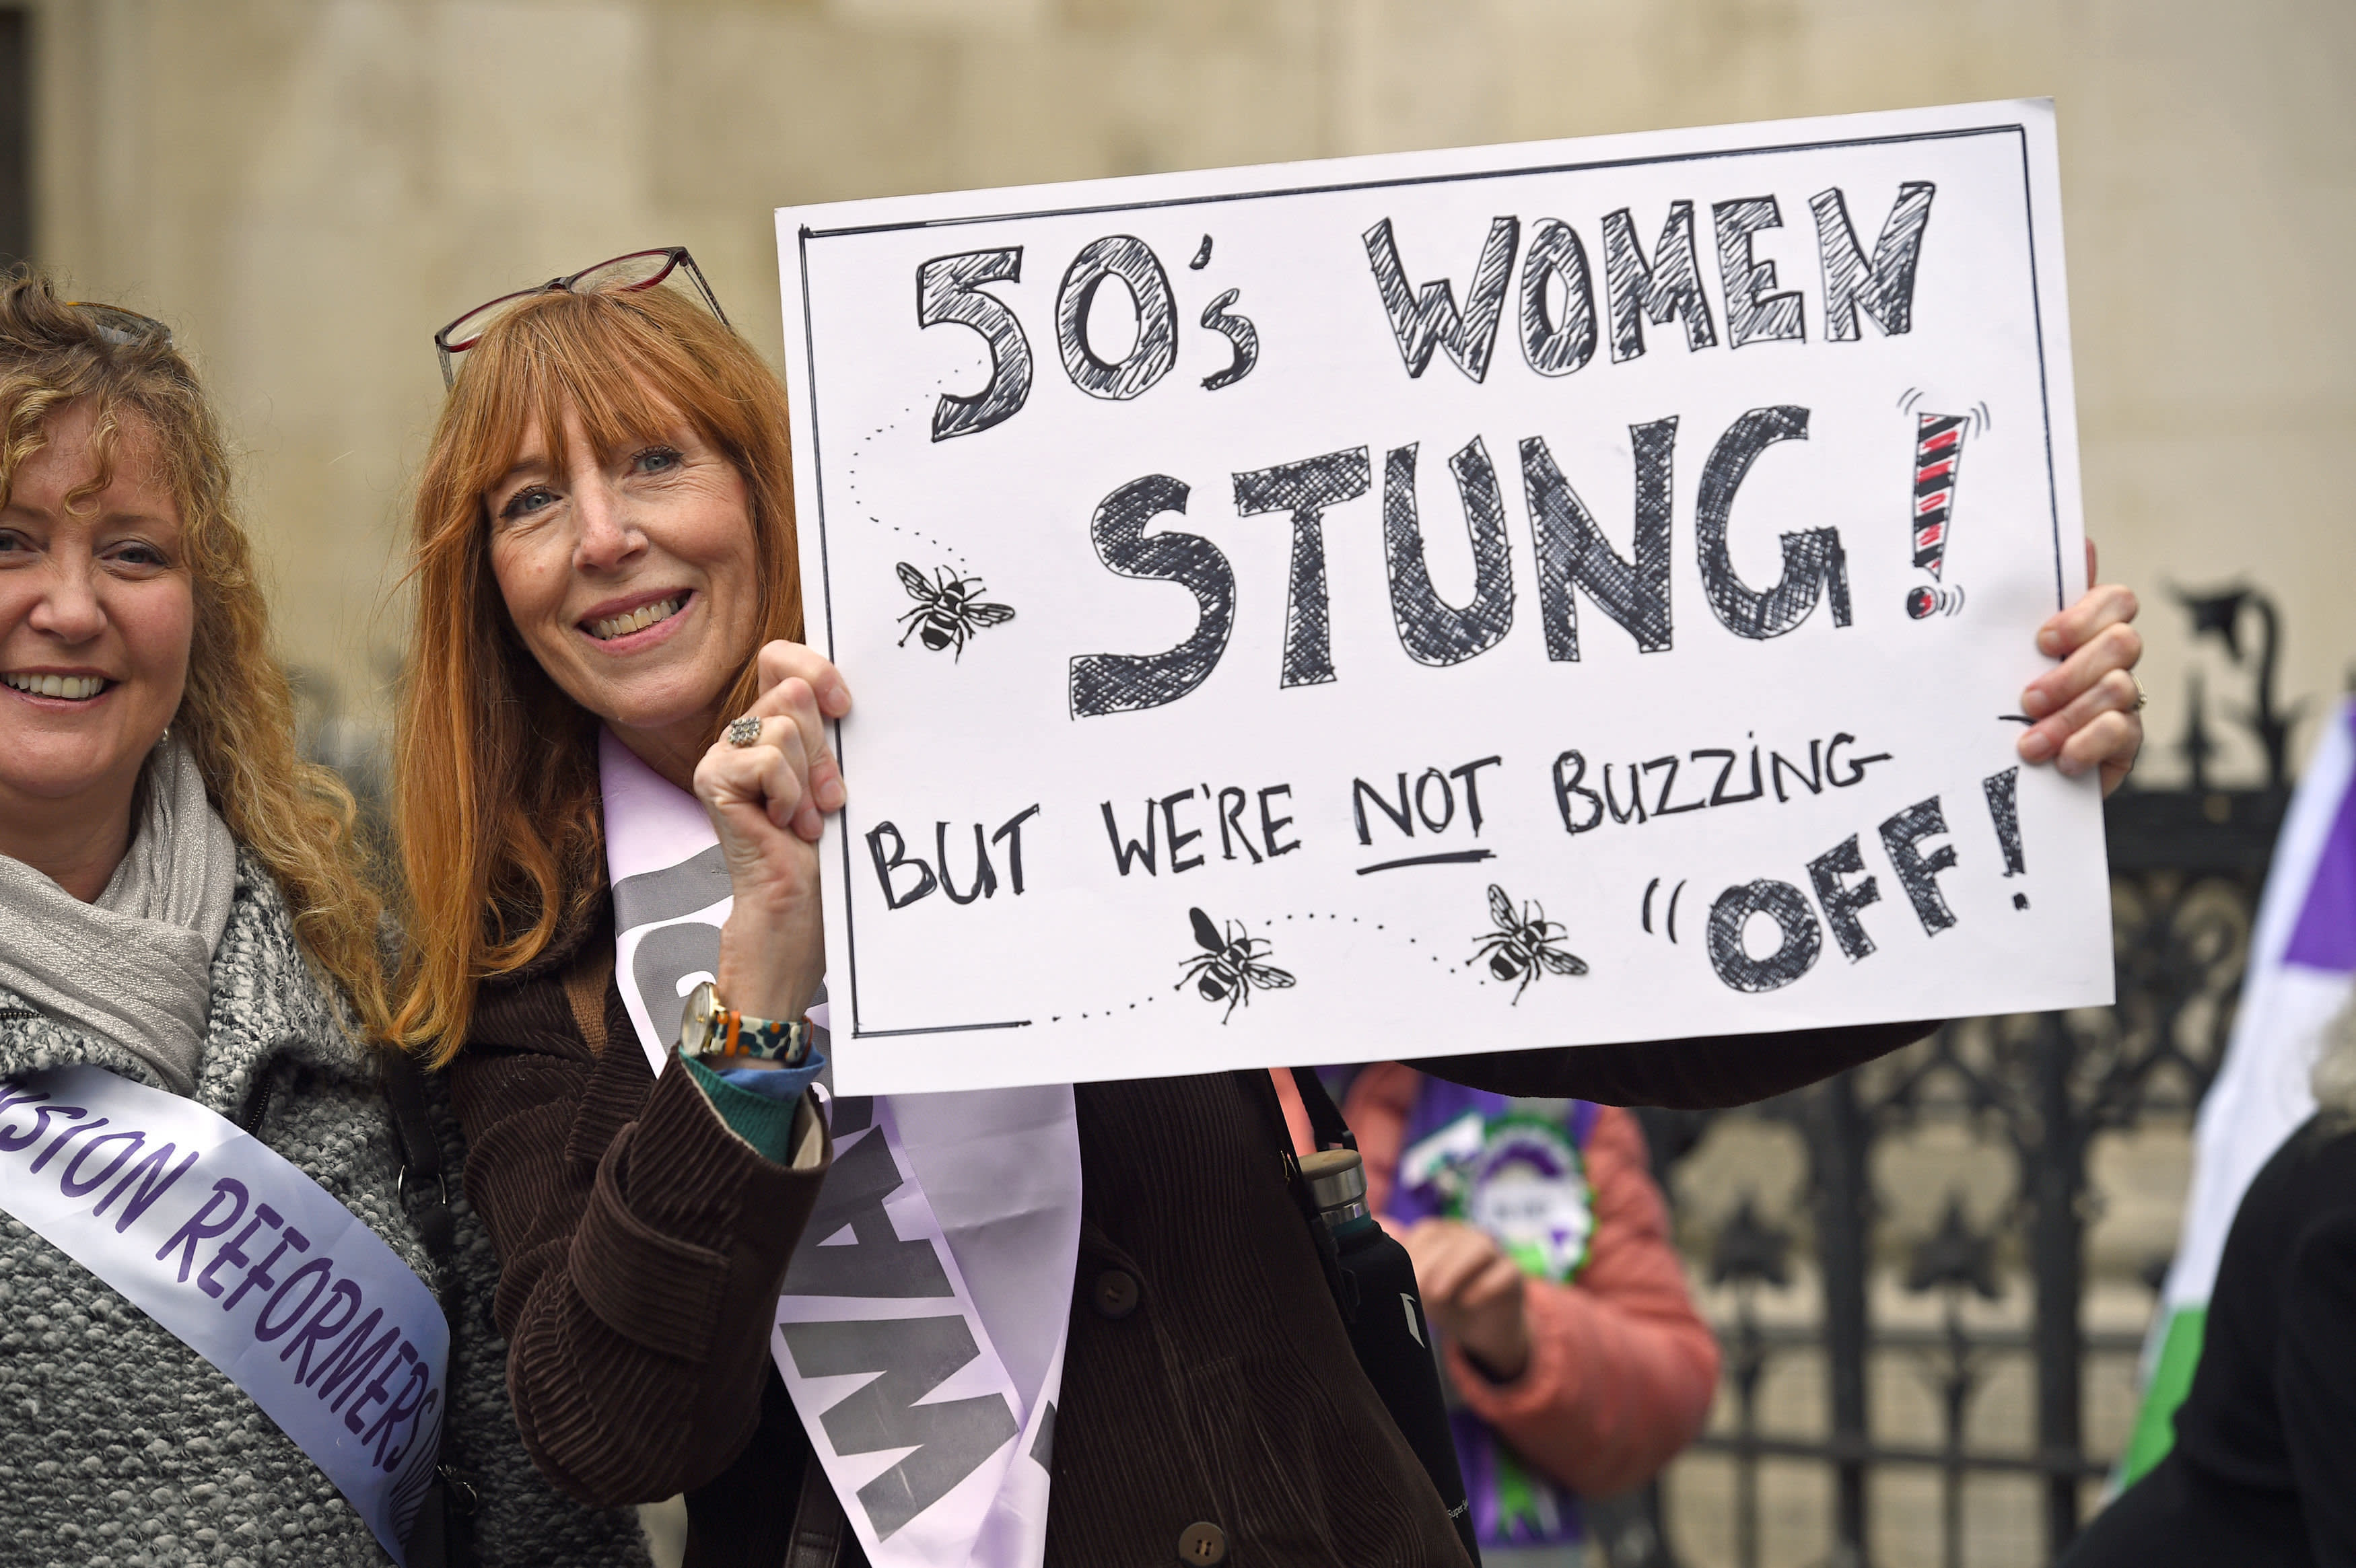 Waspi issues lobby letter